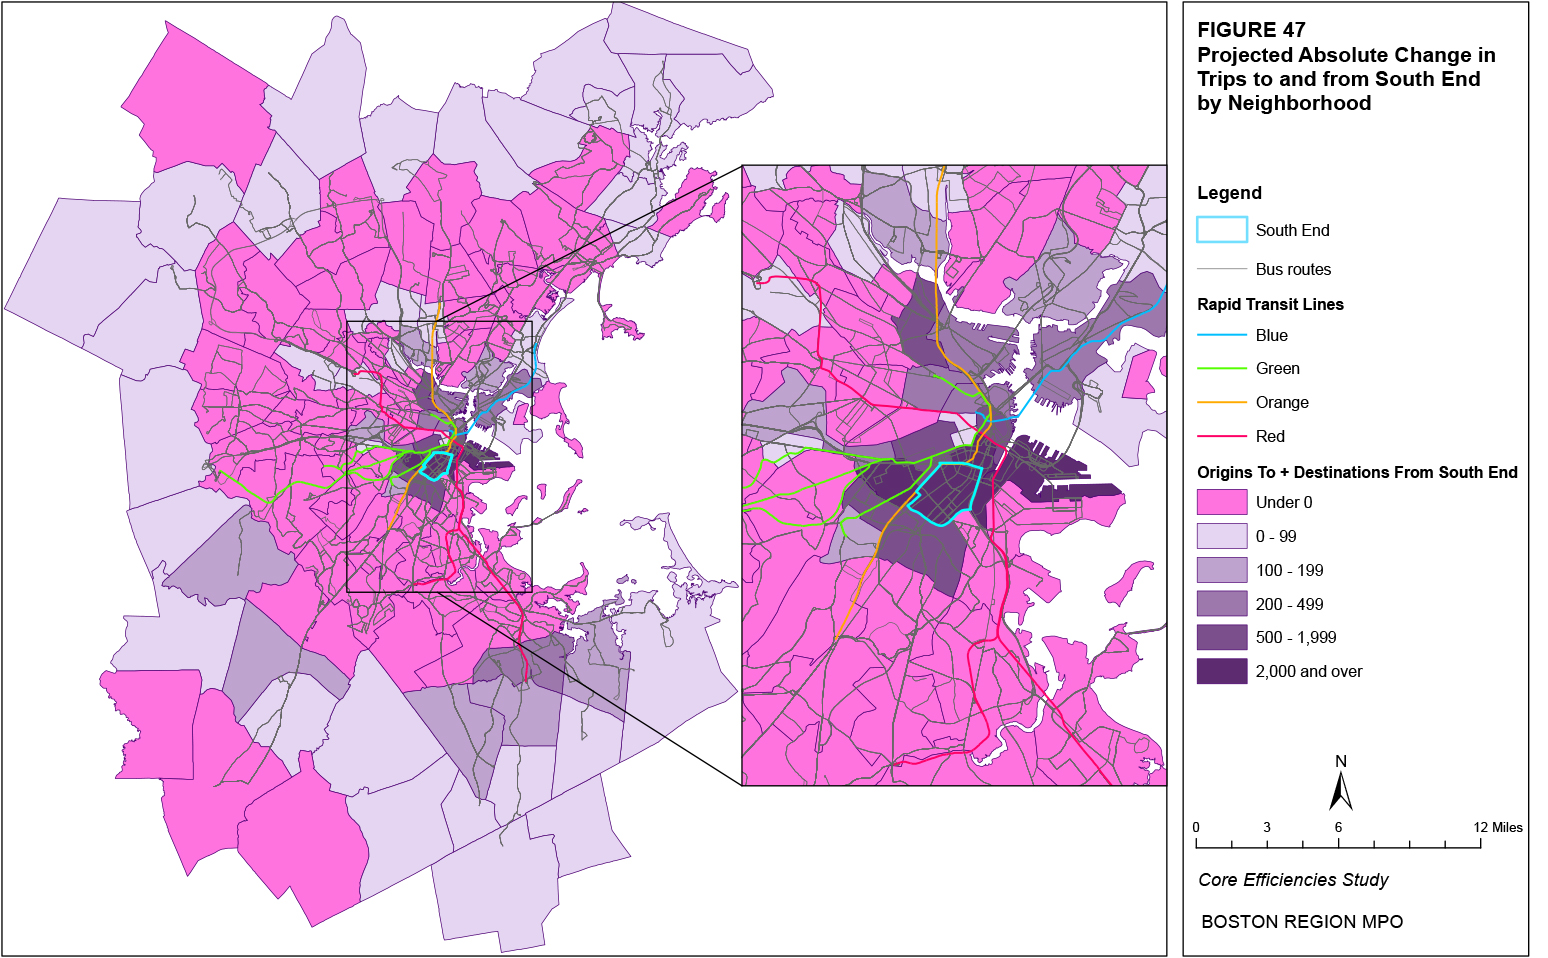 This map shows the projected absolute change in trips to and from the South End neighborhood by neighborhood.